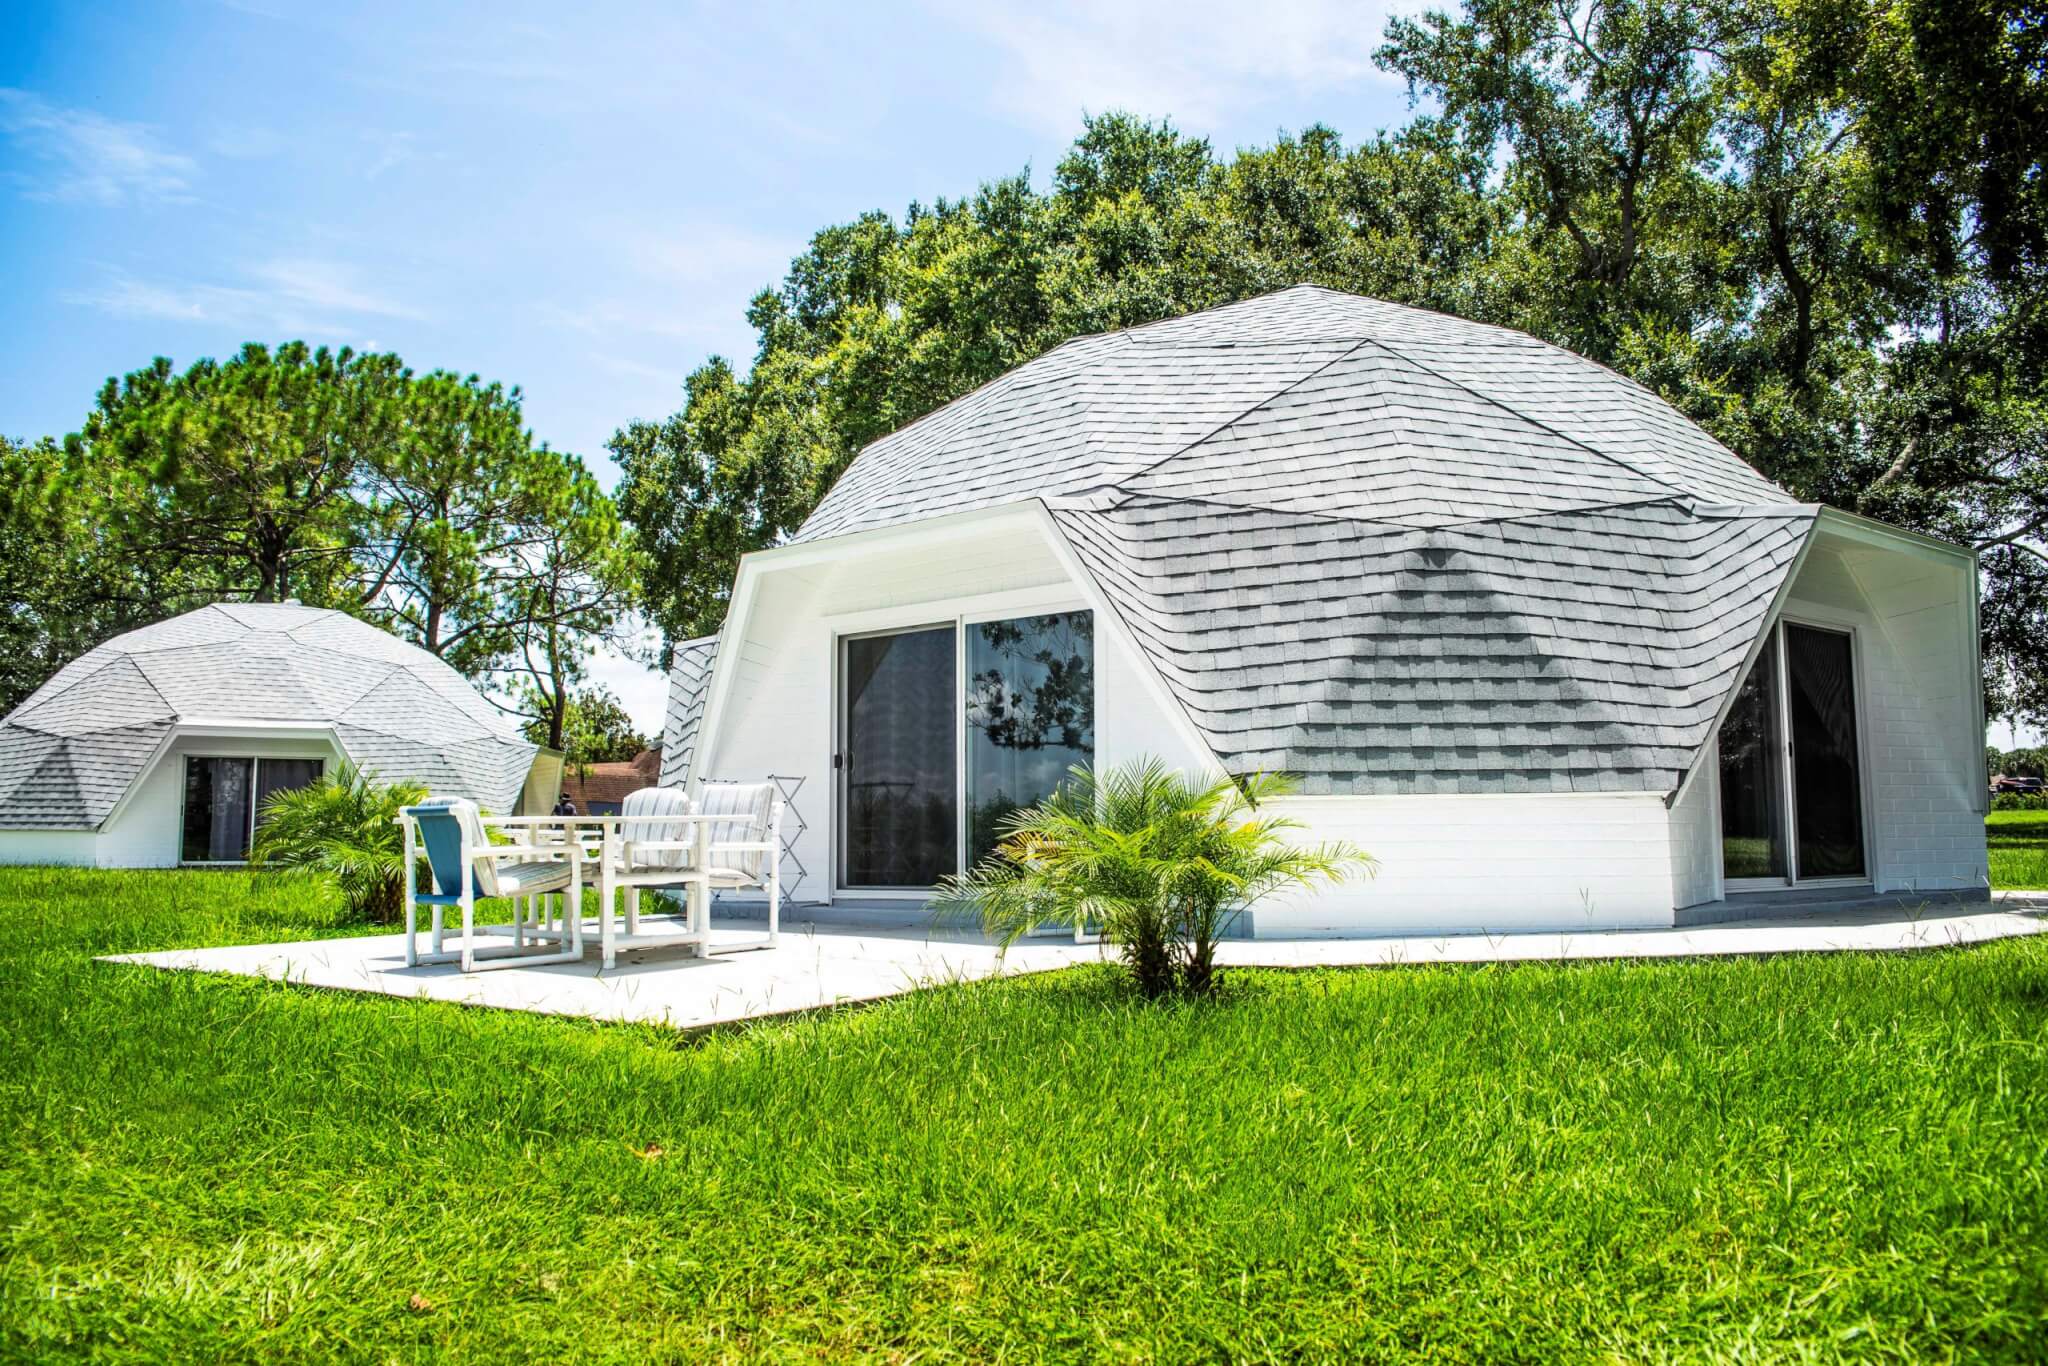 Two dome shaped homes that visitors can rent for vacations